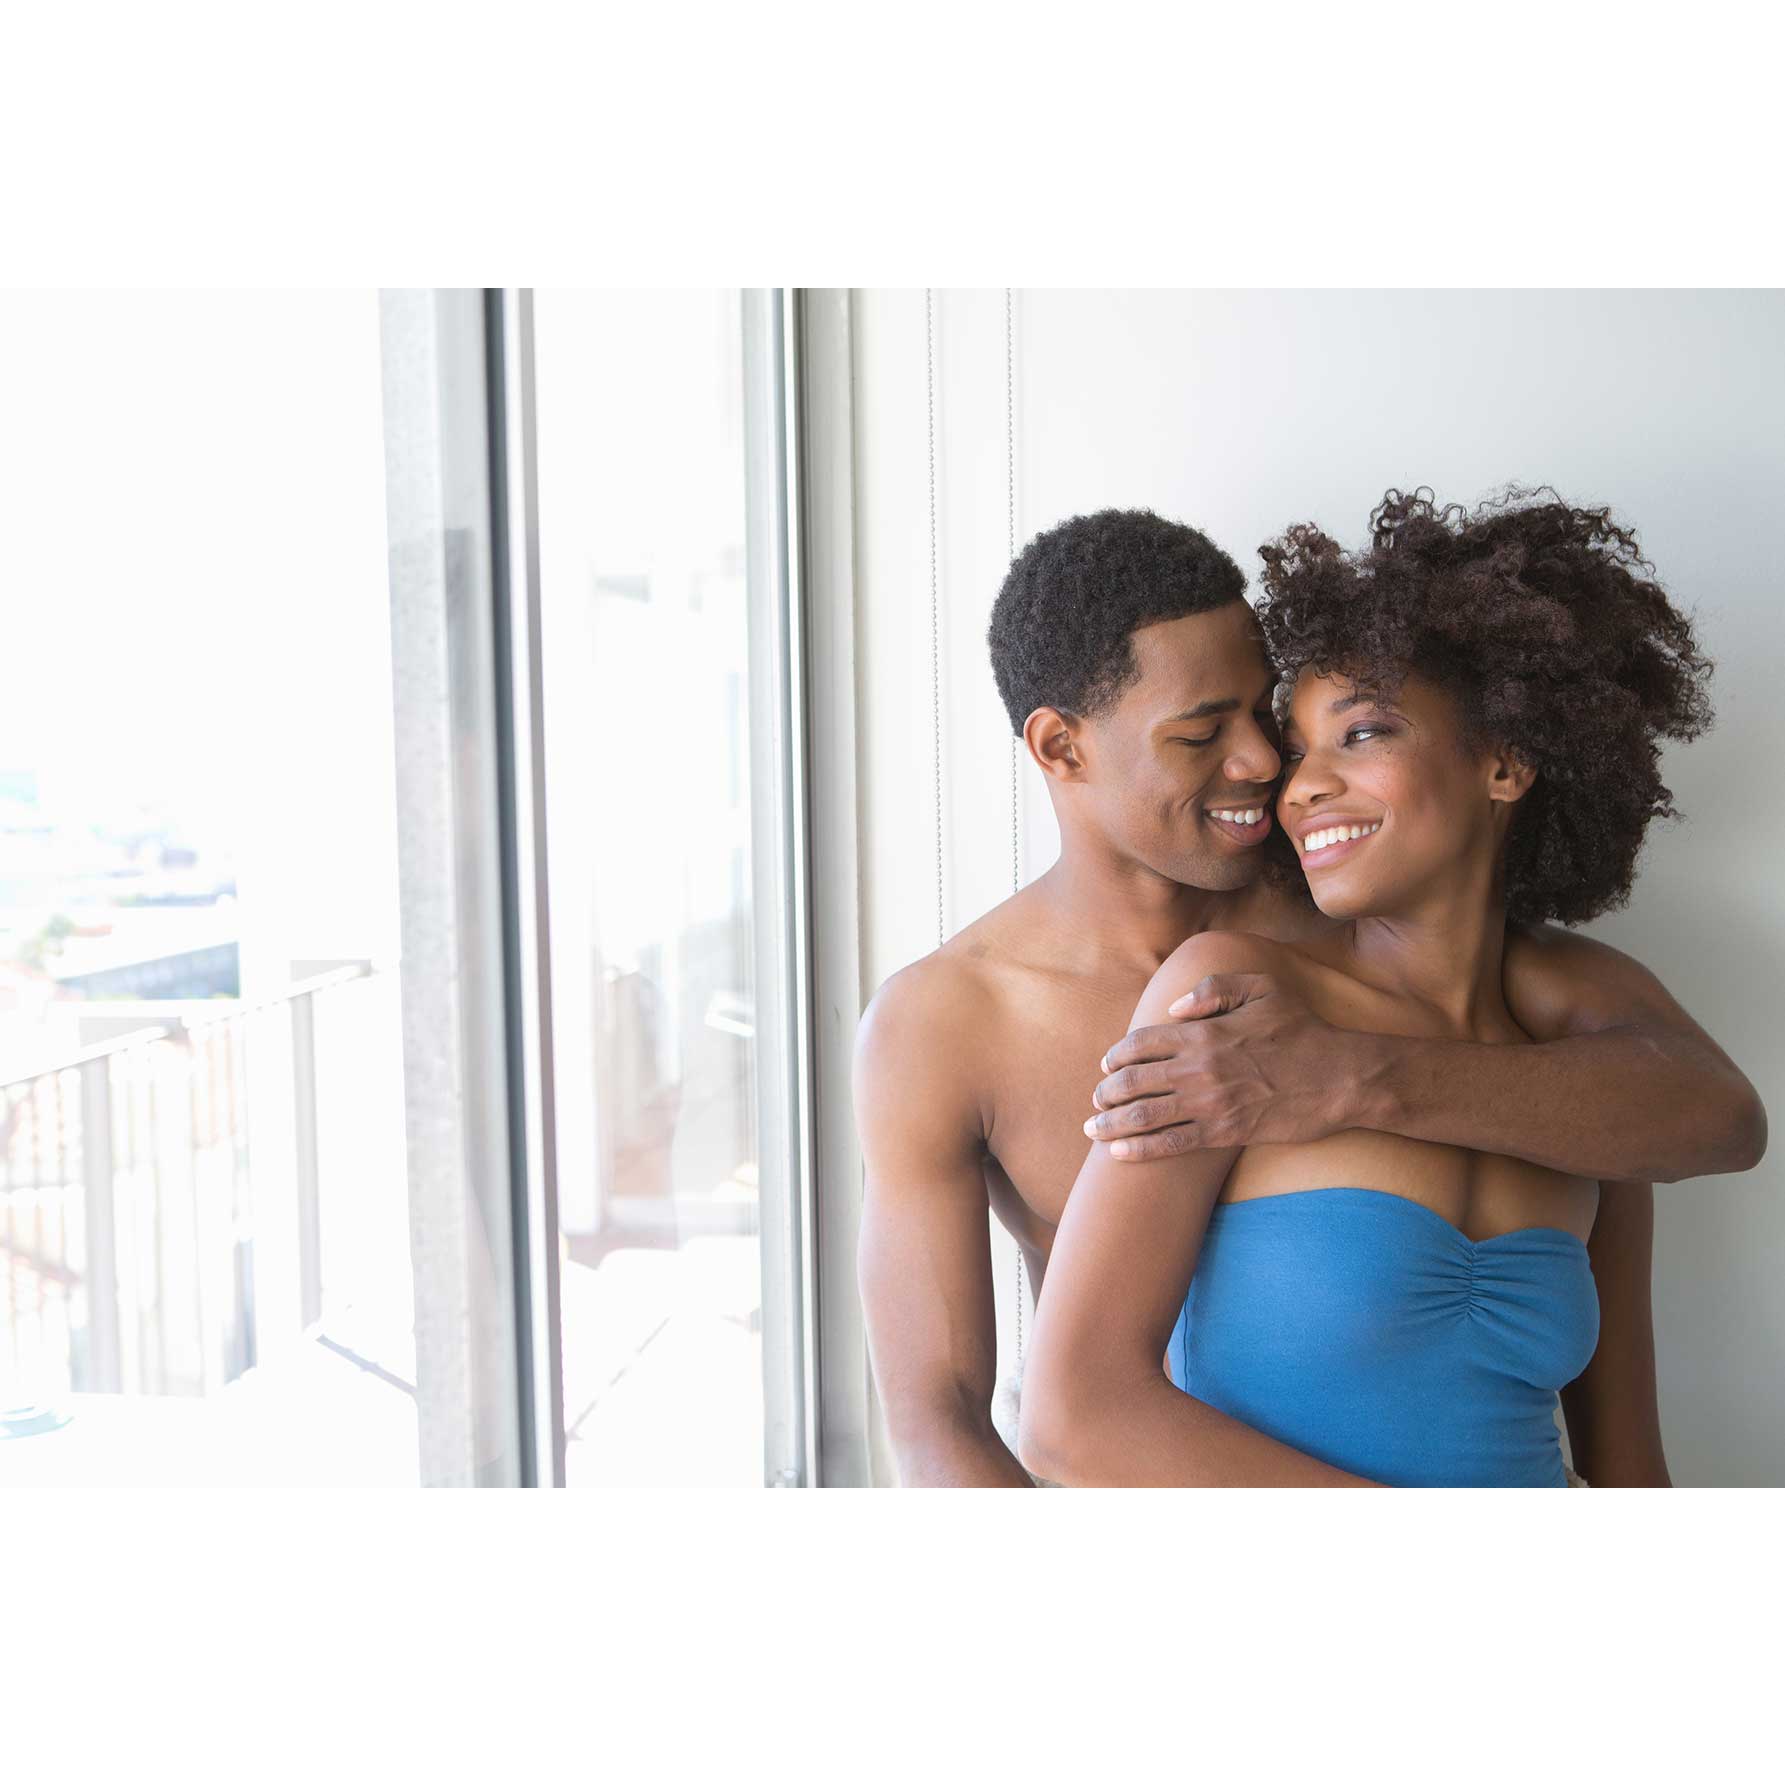 What Are We? 5 Ways To Determine Your Real Relationship Status
